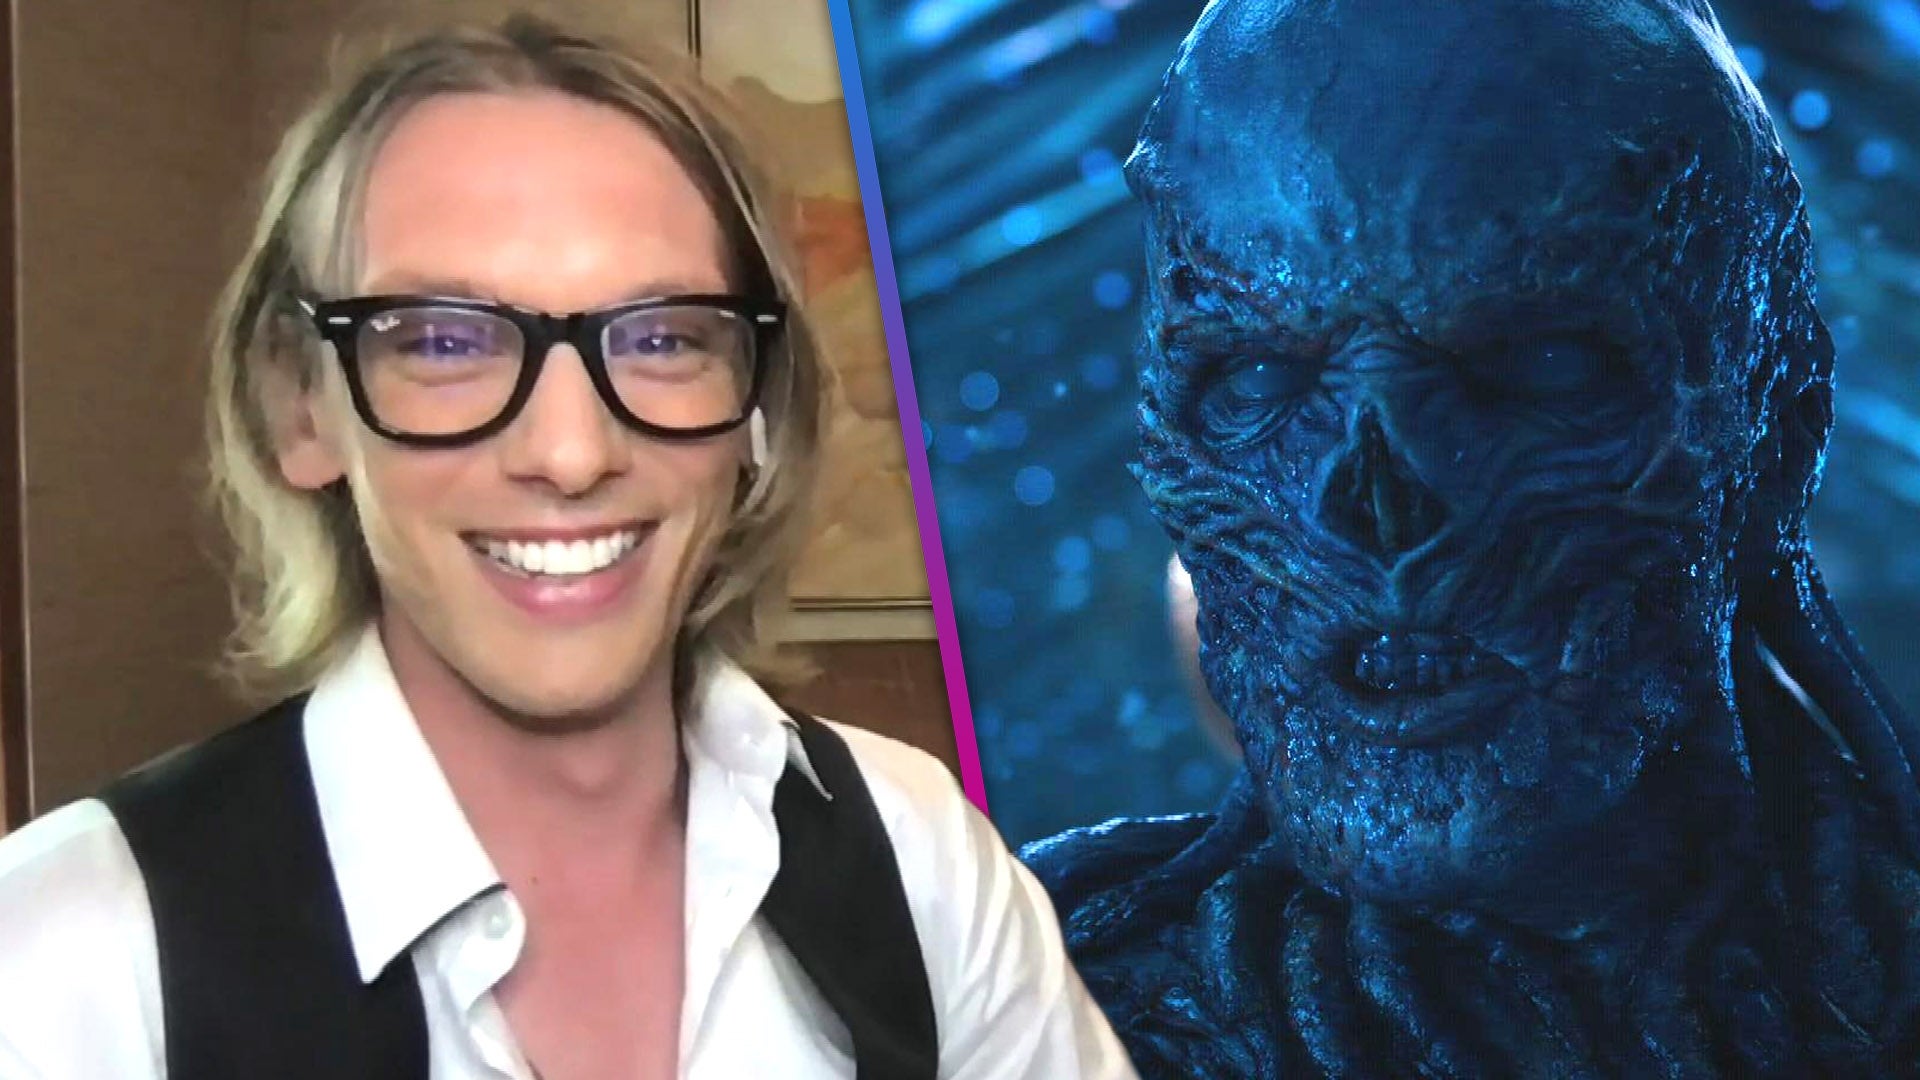 IMDb - #10 Jamie Campbell Bower  No one had a more terrifying on-screen  transformation in 2022 than Jamie Campbell Bower, aka Vecna, the big bad of  Stranger Things Season 4. The